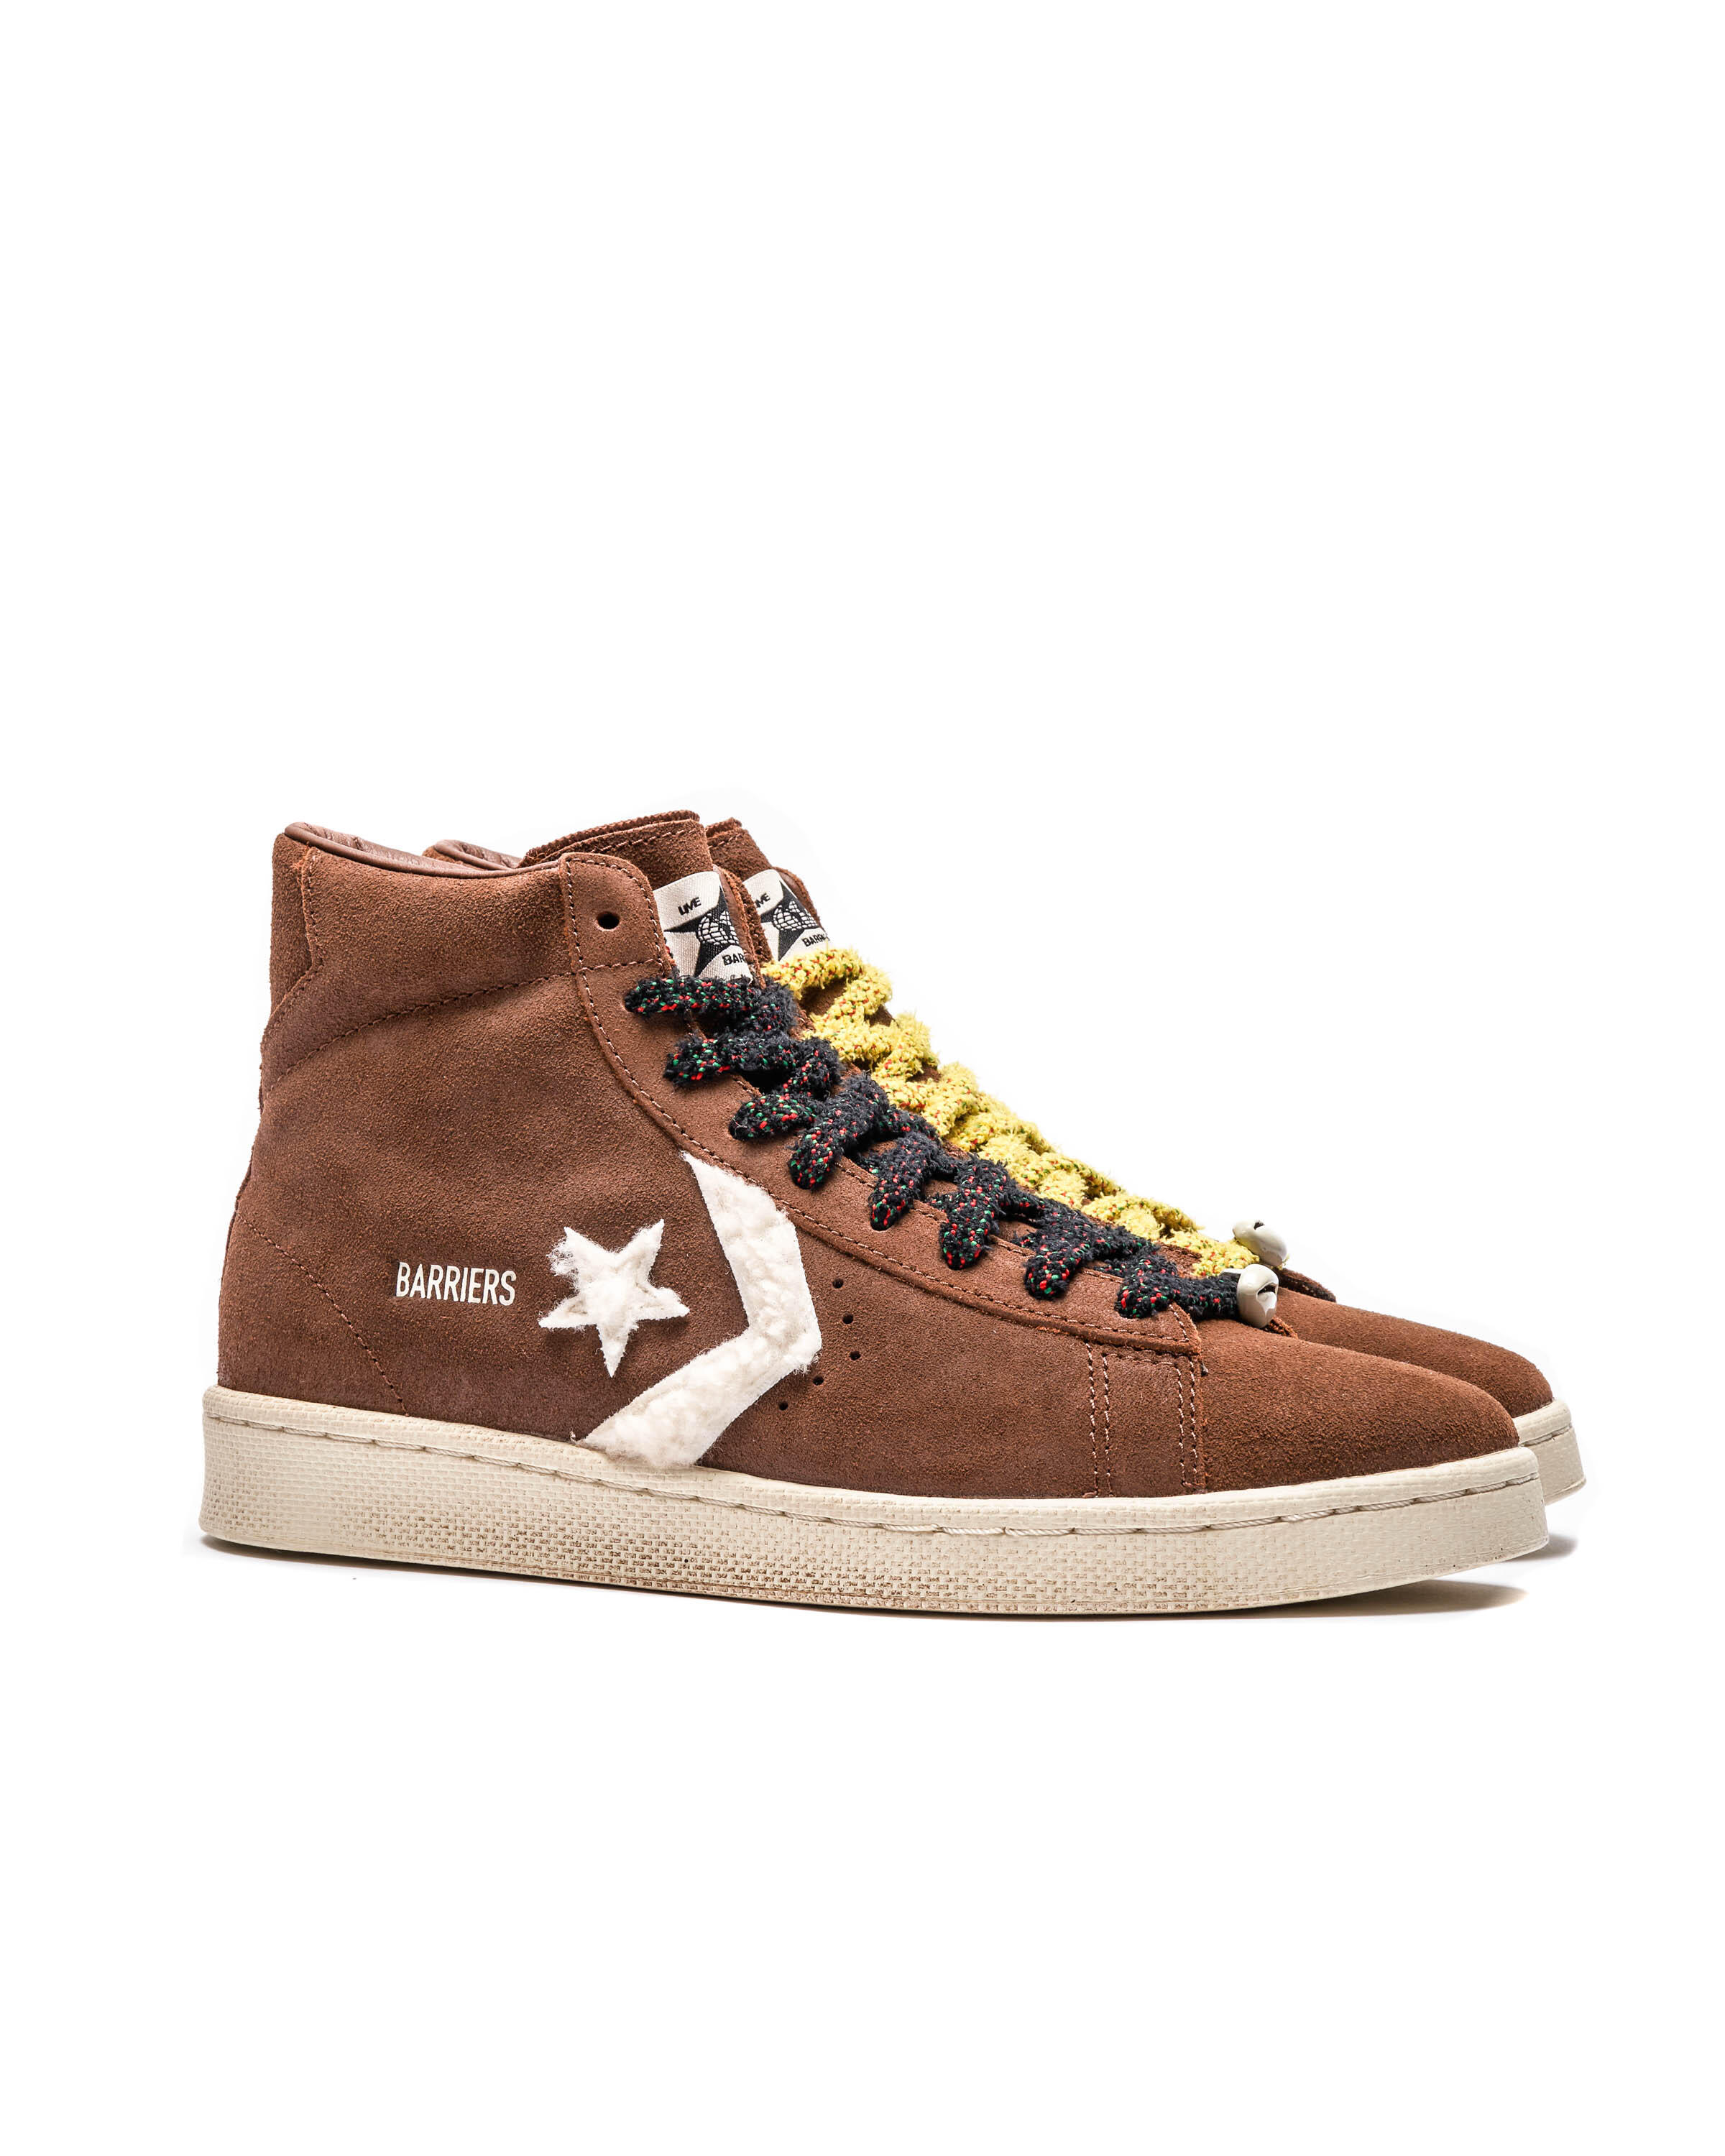 Converse x Barriers Pro Leather Hi